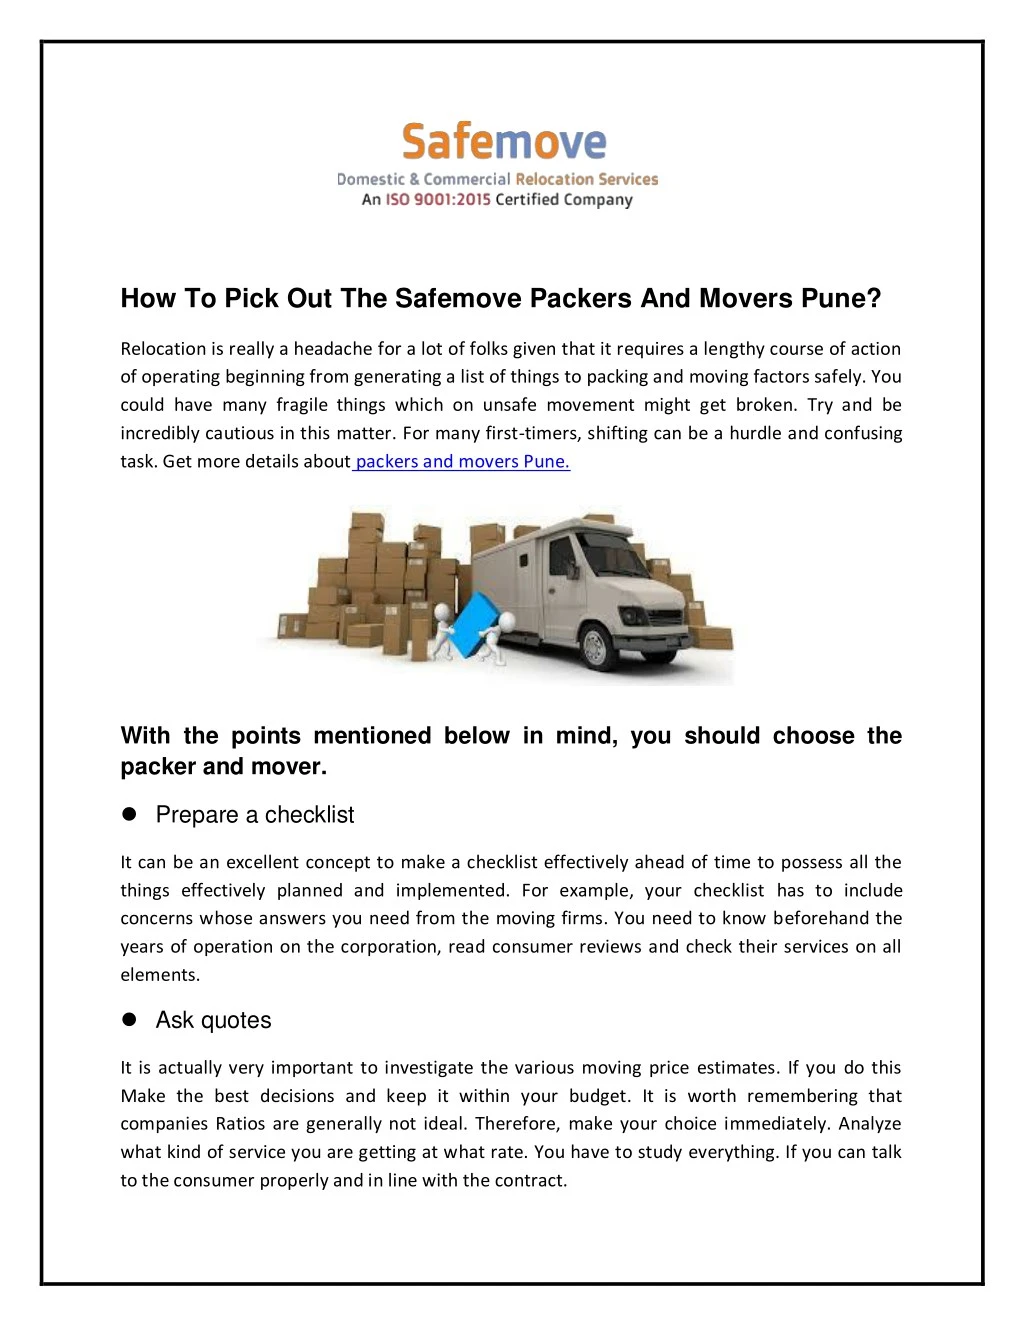 how to pick out the safemove packers and movers